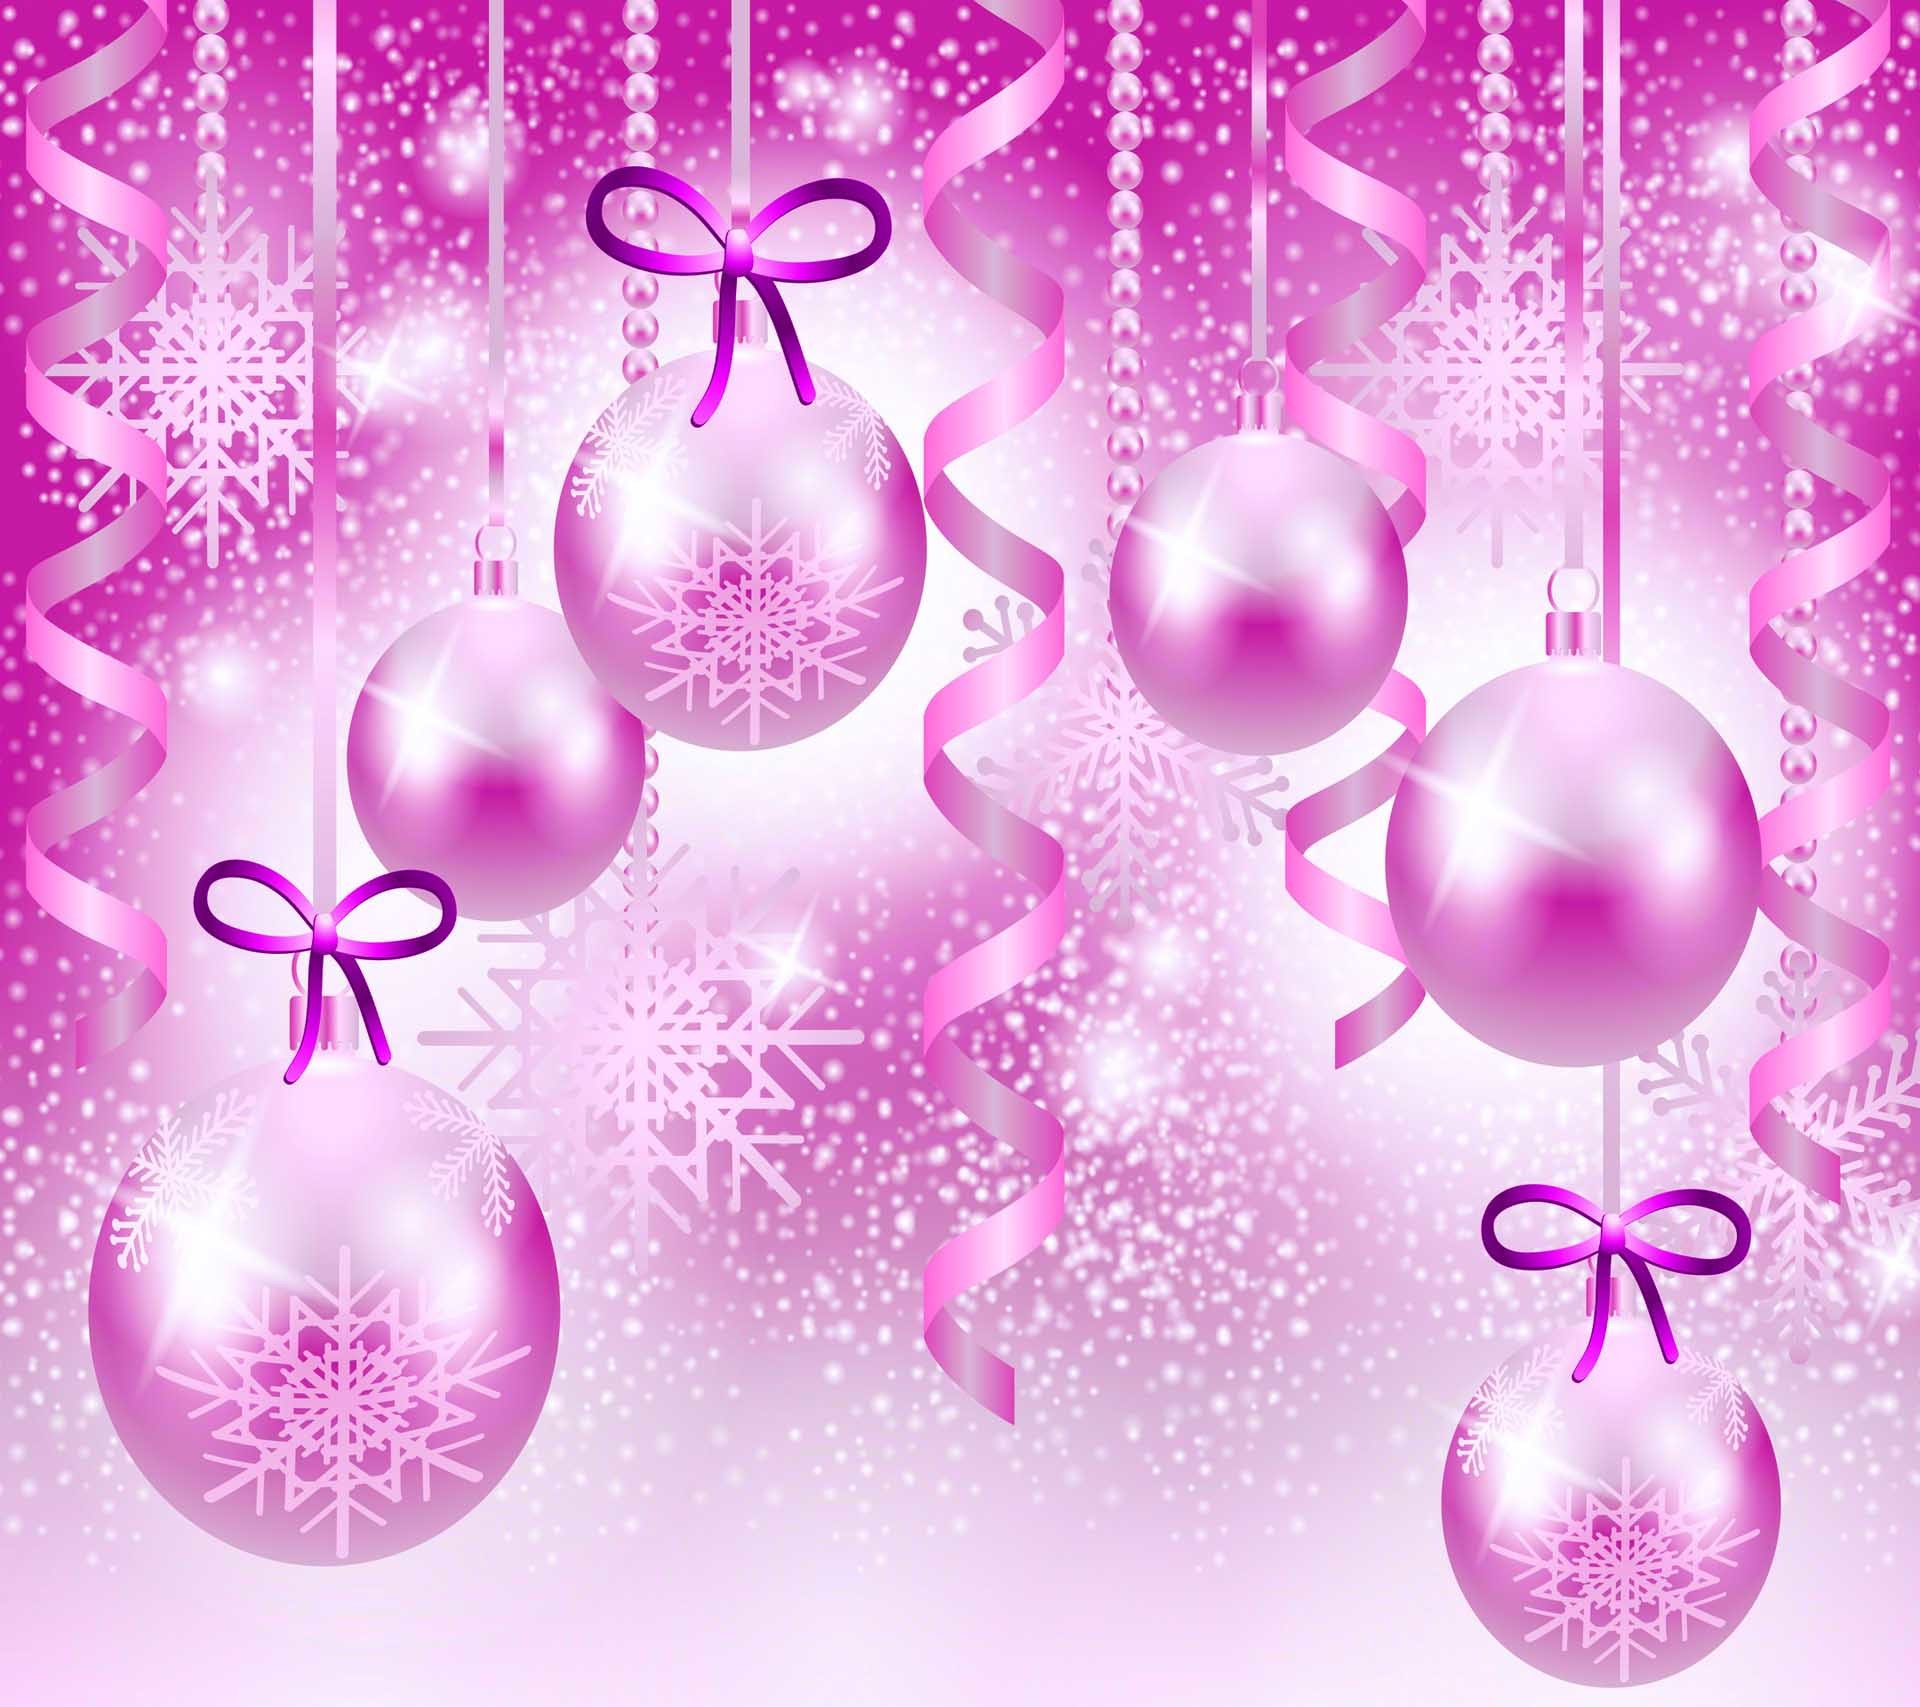 1920x1707 2015 pink Christmas backgrounds - wallpapers, images, photos .